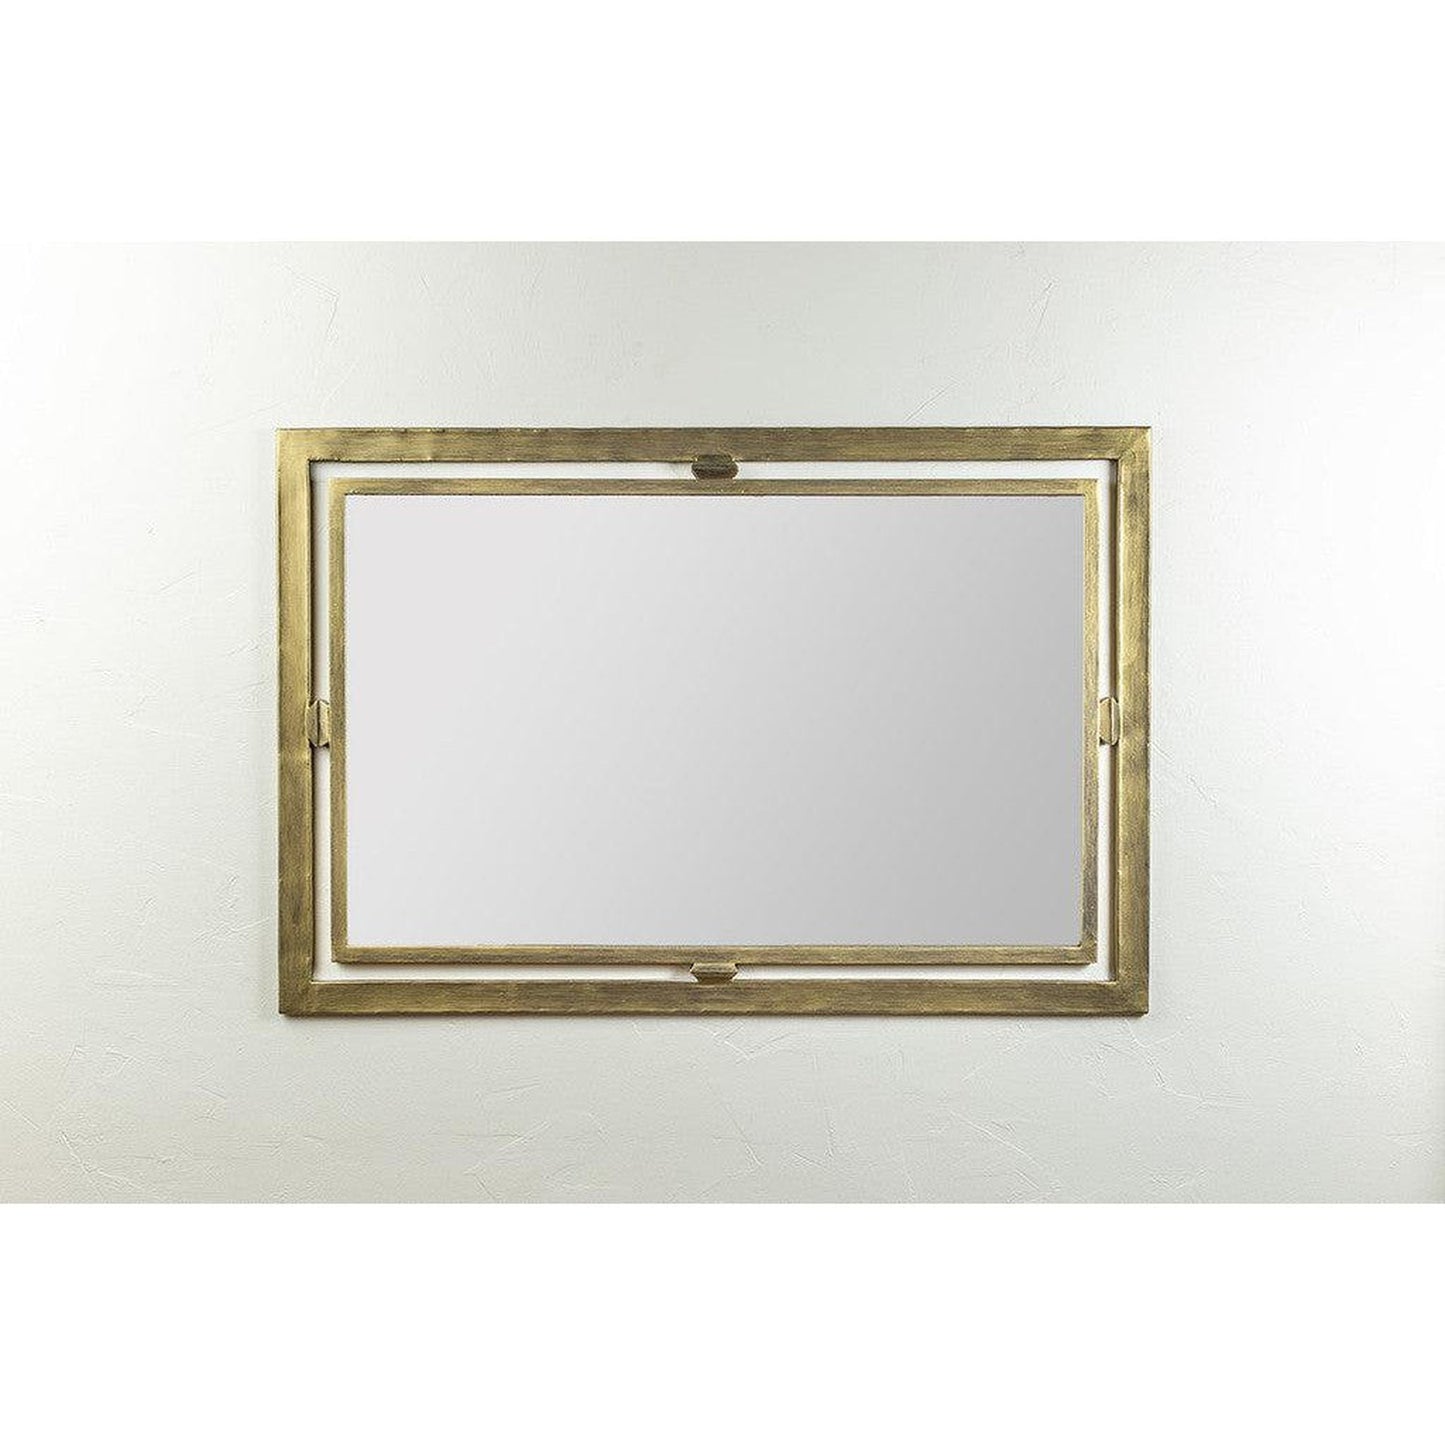 Stone County Ironworks Forest Hill 27" x 40" Large Hand Rubbed Bronze Iron Wall Mirror With Copper Iron Accent